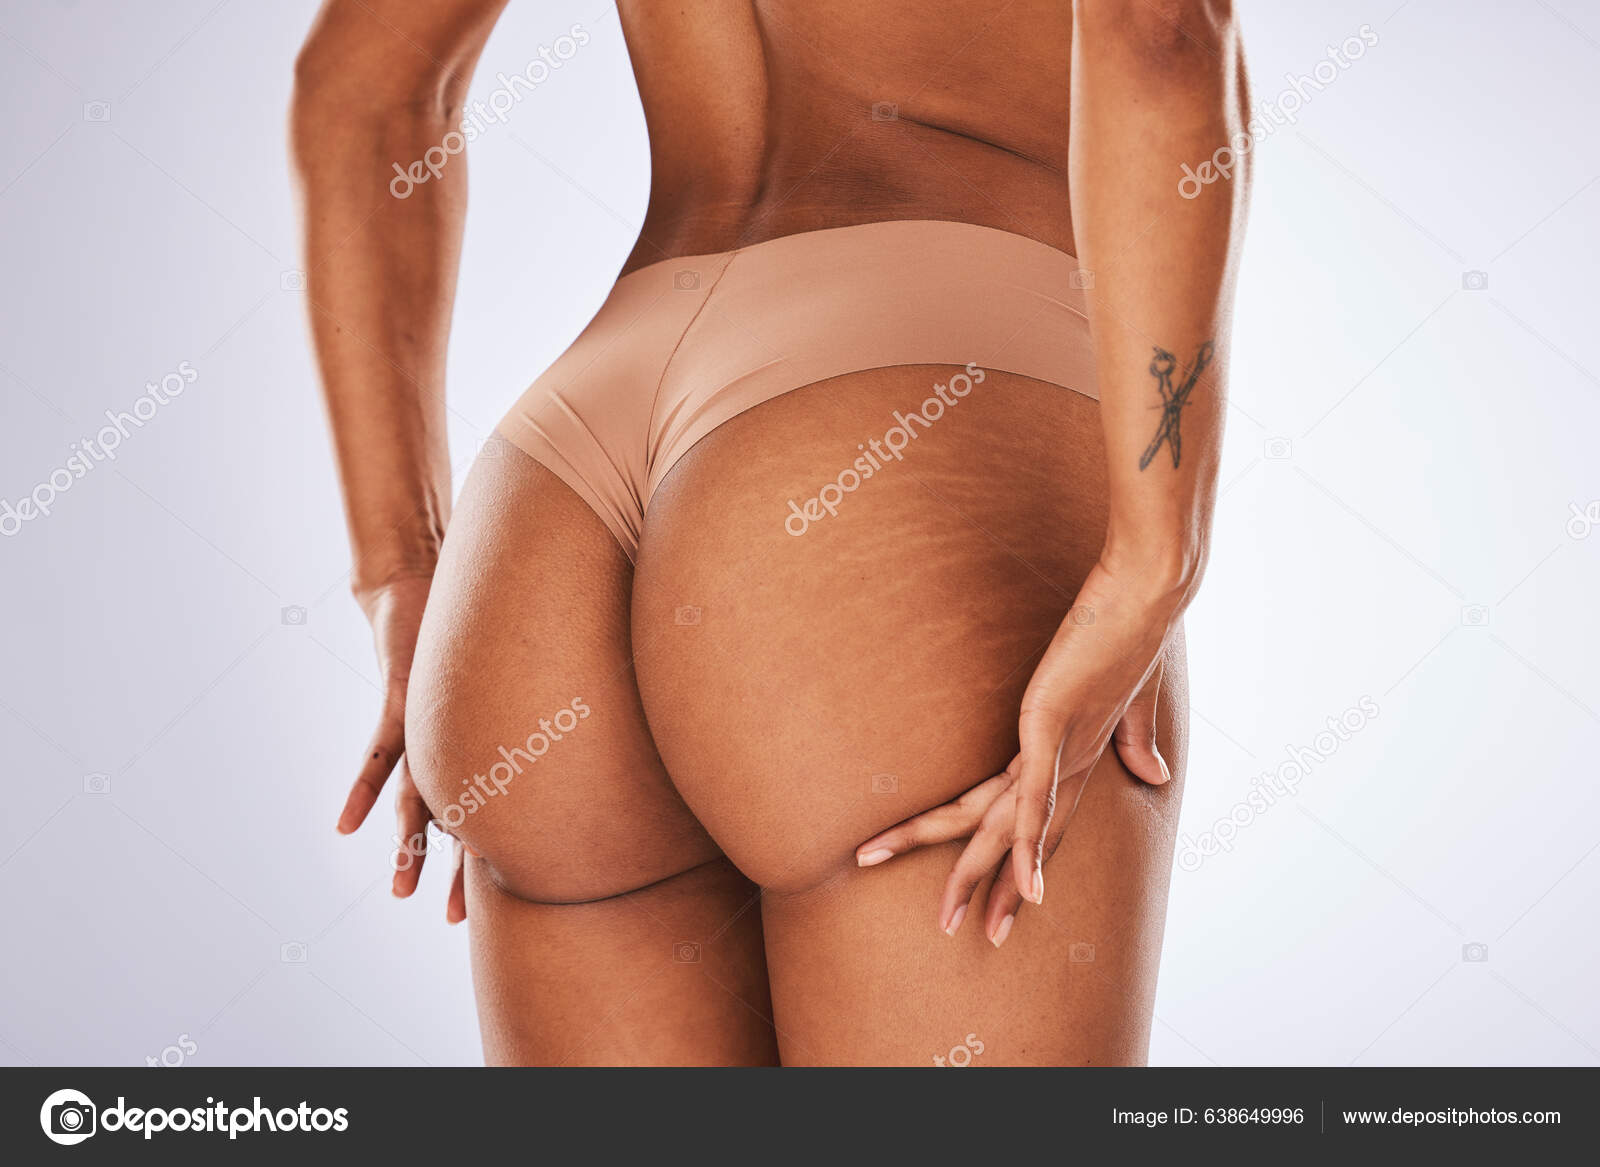 Curves Girl Butt, without Cellulite Stock Image - Image of model